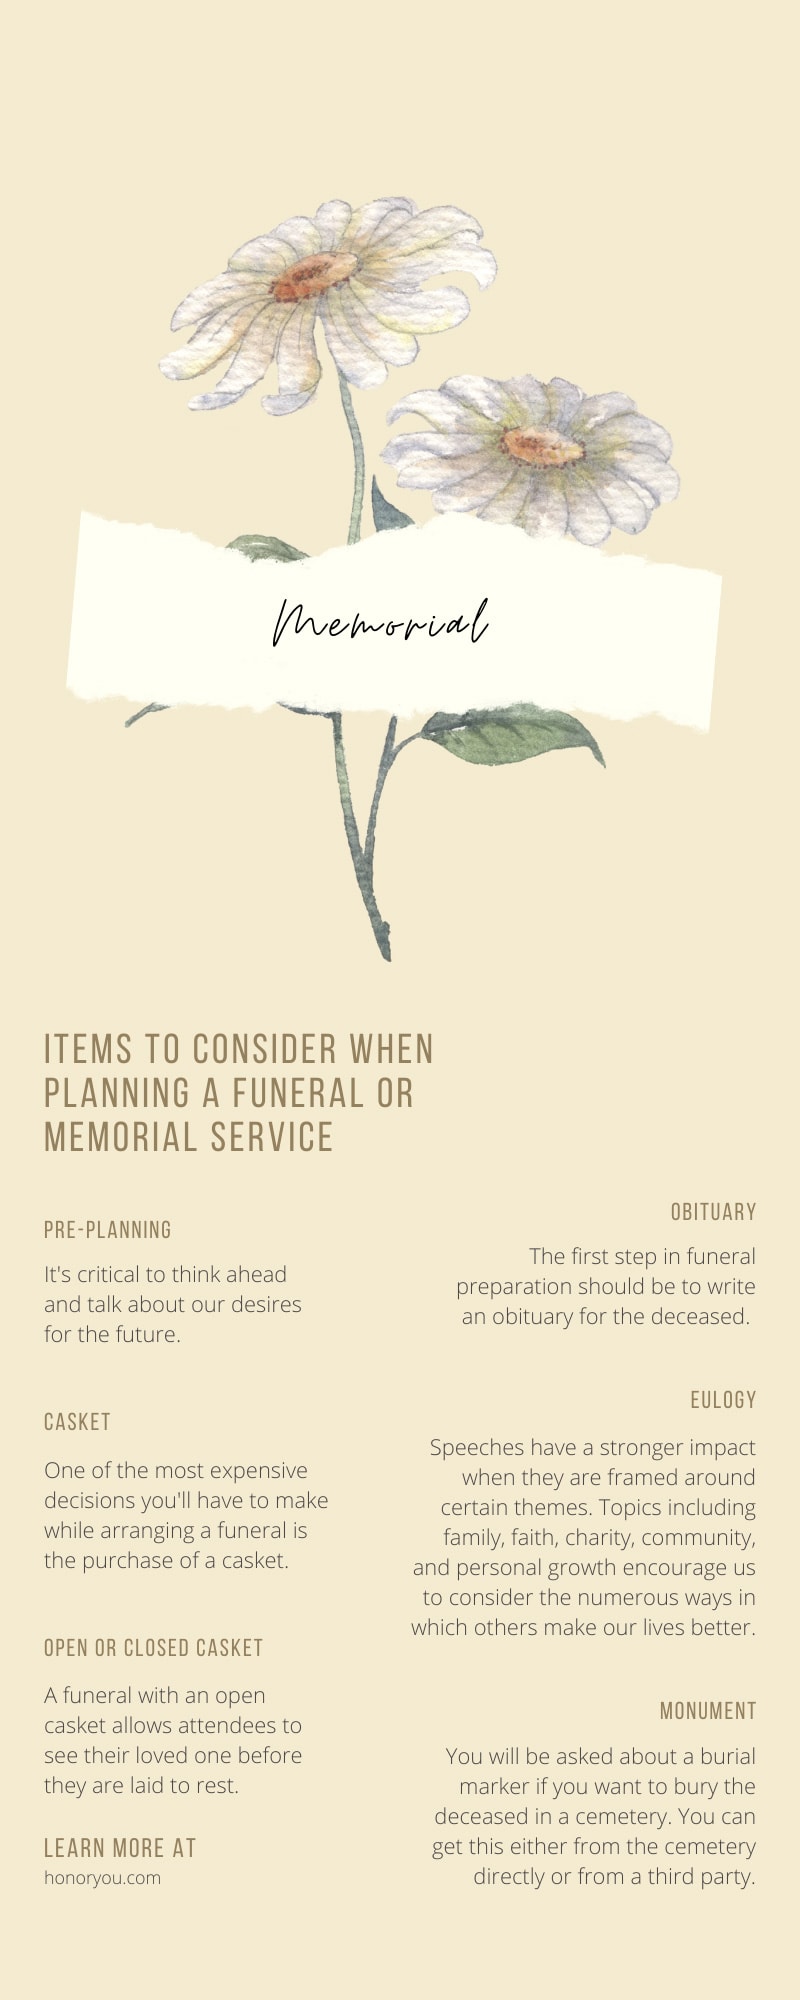 Items To Consider When Planning a Funeral or Memorial Service